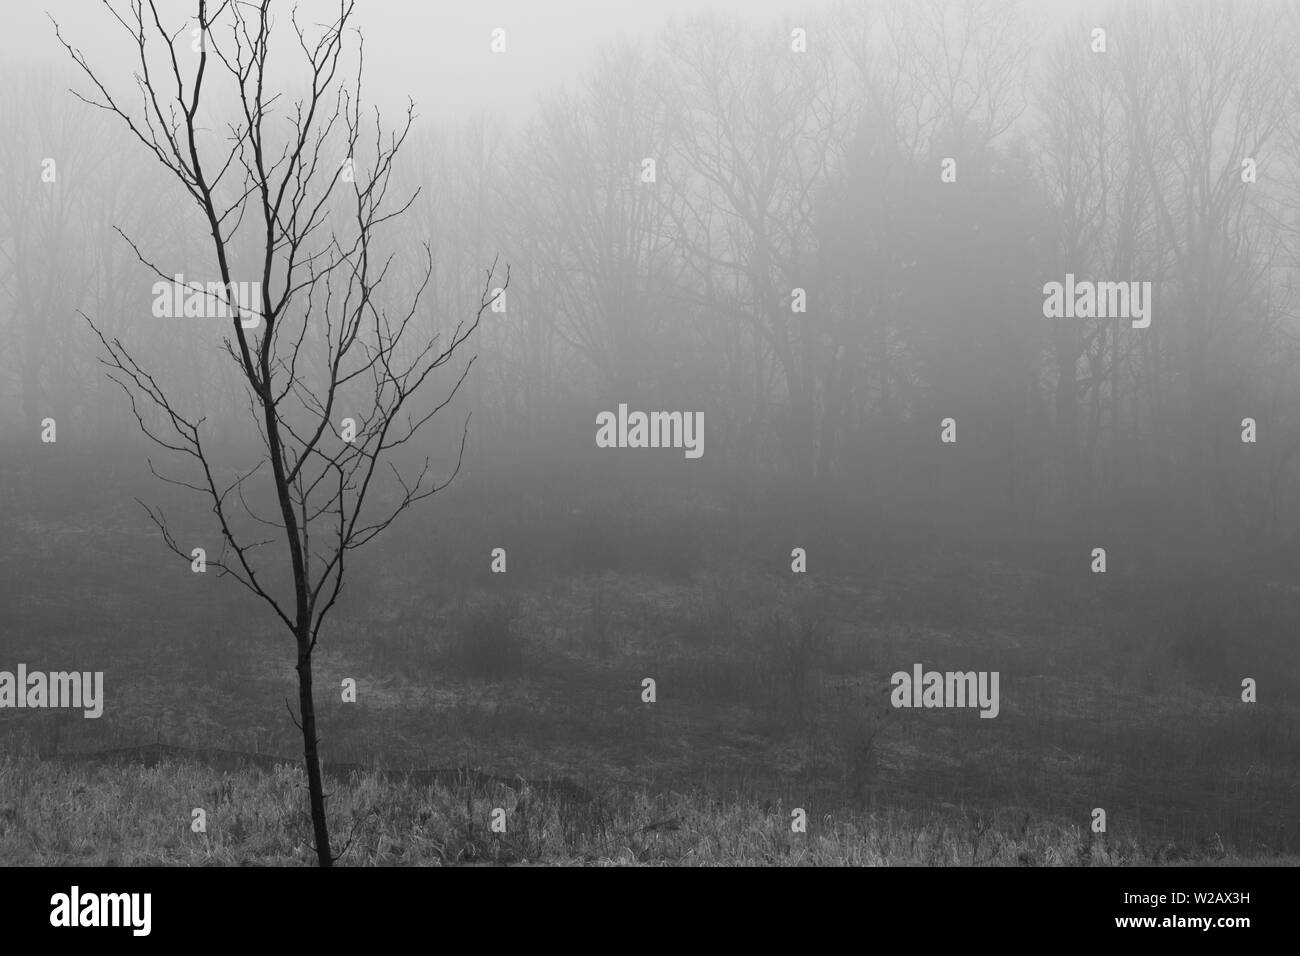 Dark Foggy and Misty Forest With Dark Tall Trees Stock Photo